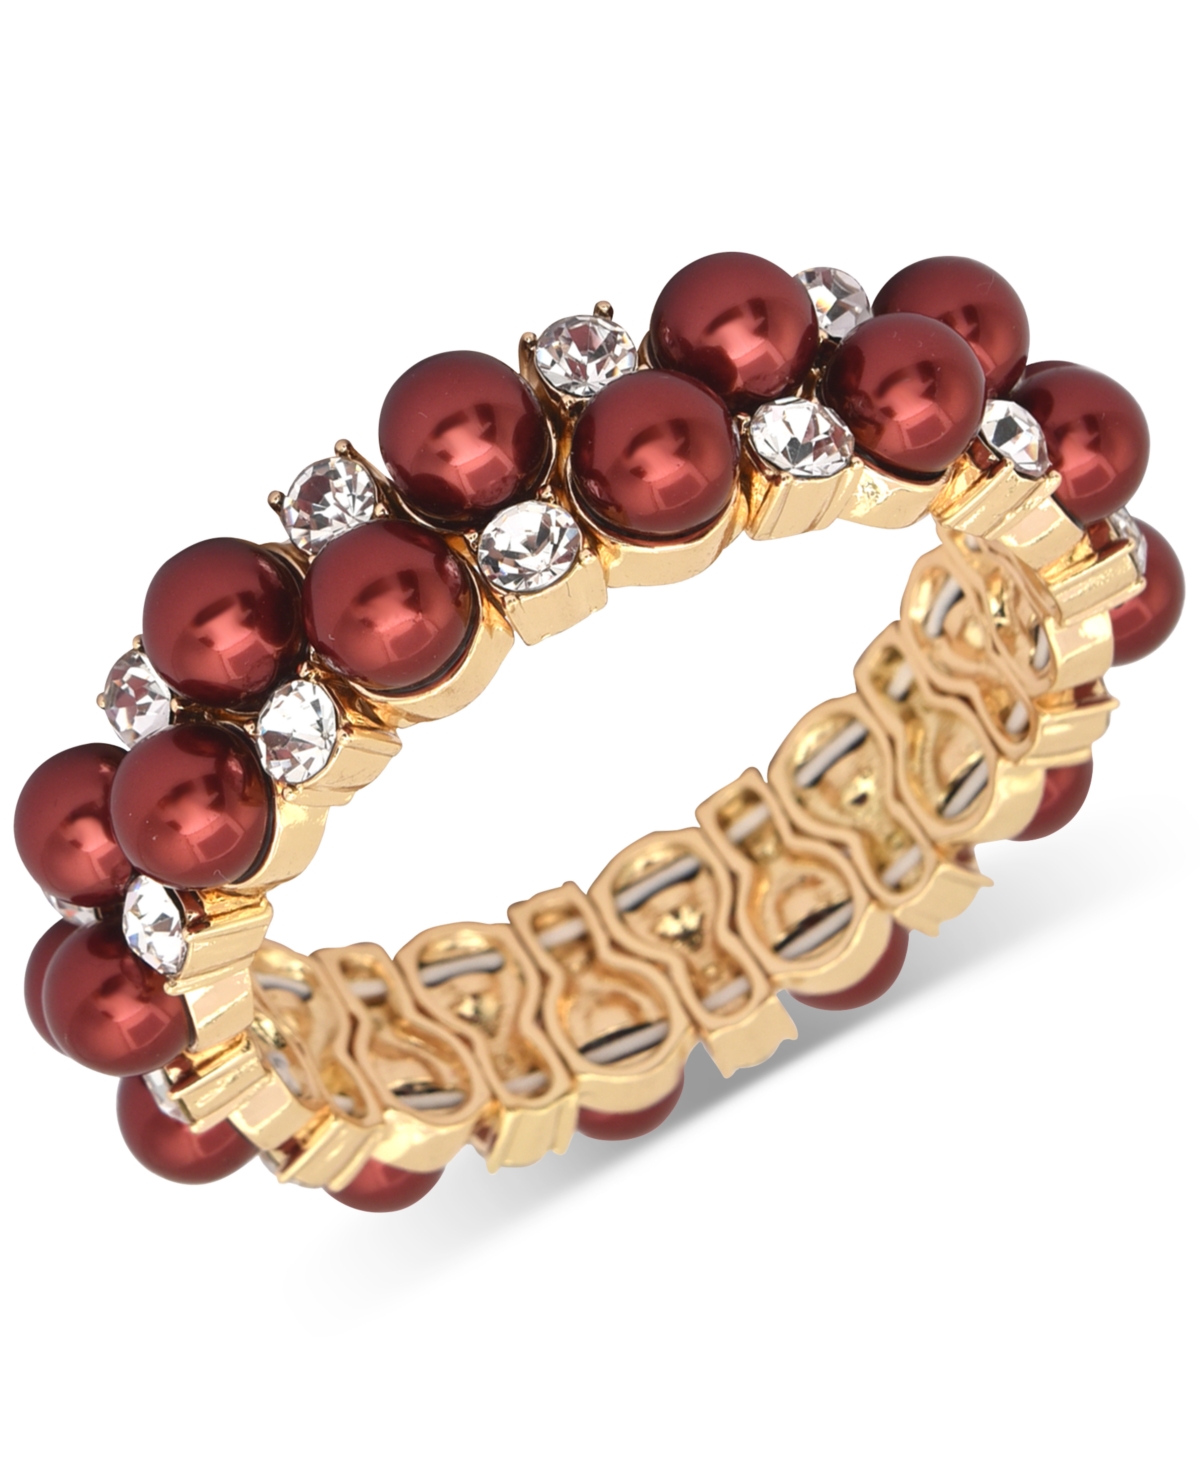 Gold-Tone Crystal & Colored Imitation Pearl Stretch Bracelet, Created for Macy's - Red